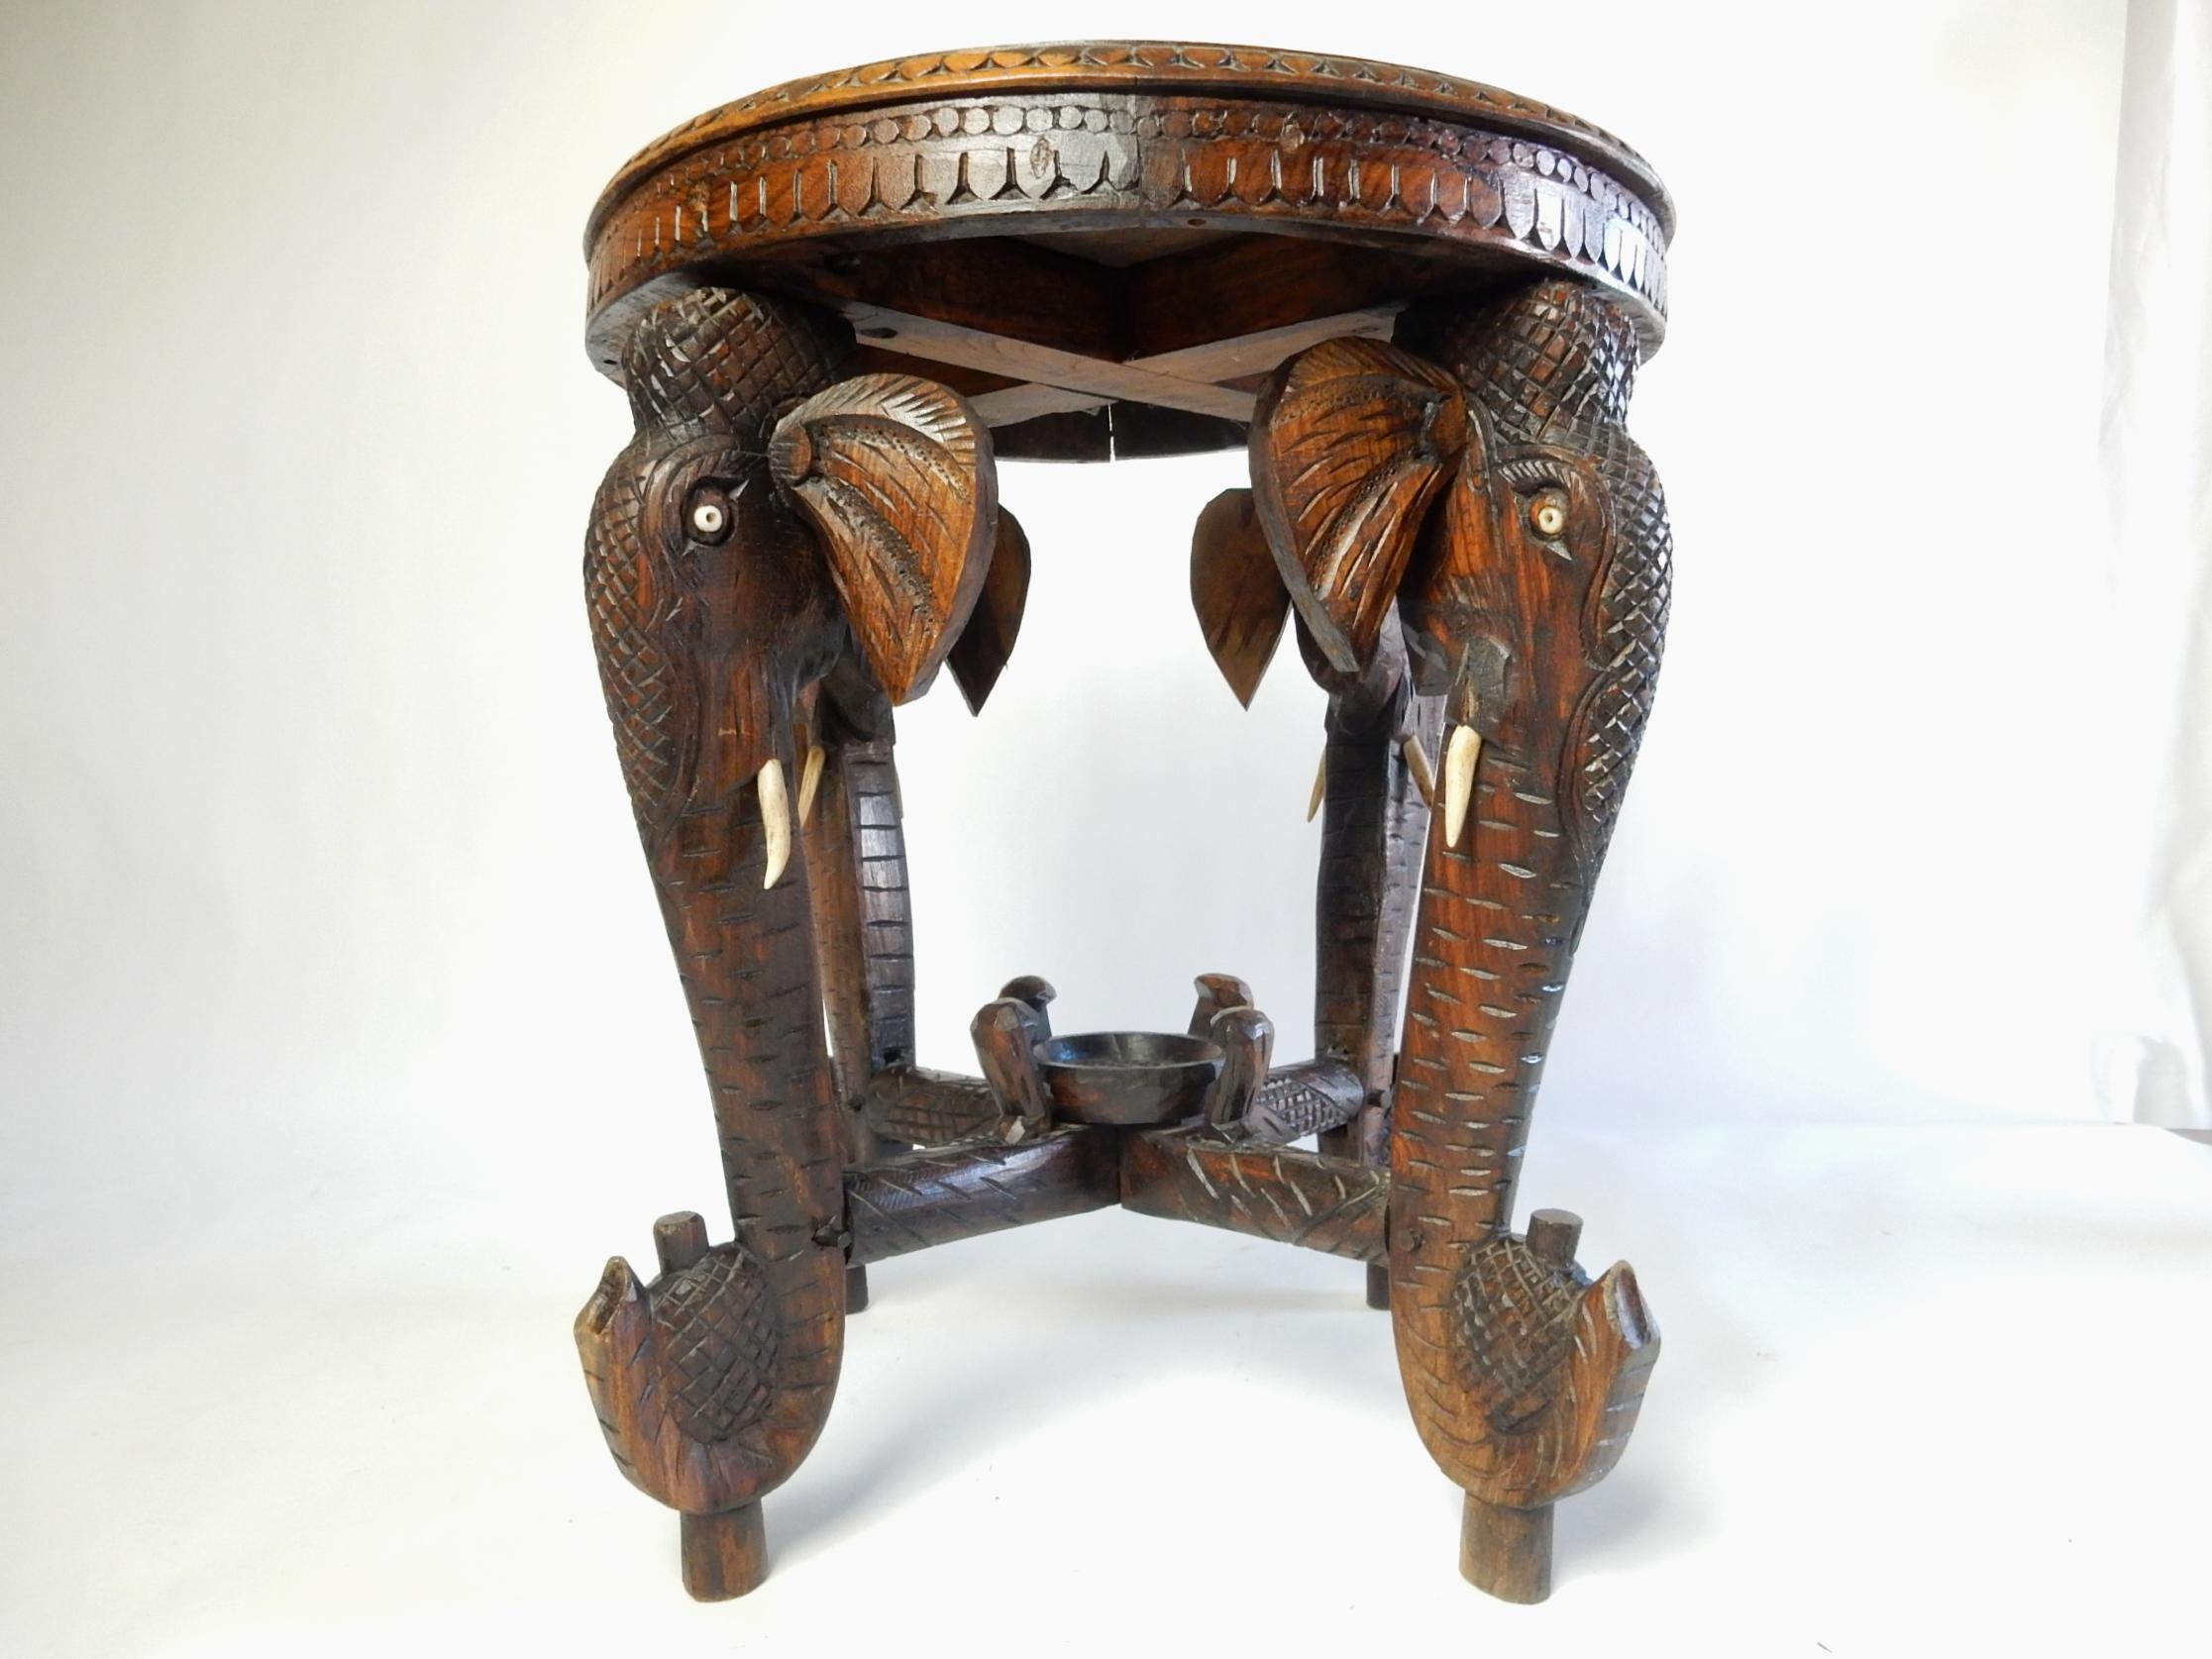 Hand-Carved Antique 1900's Anglo-Raj Indian Elephant Leg Gueridon Table with Bone Inlay Top